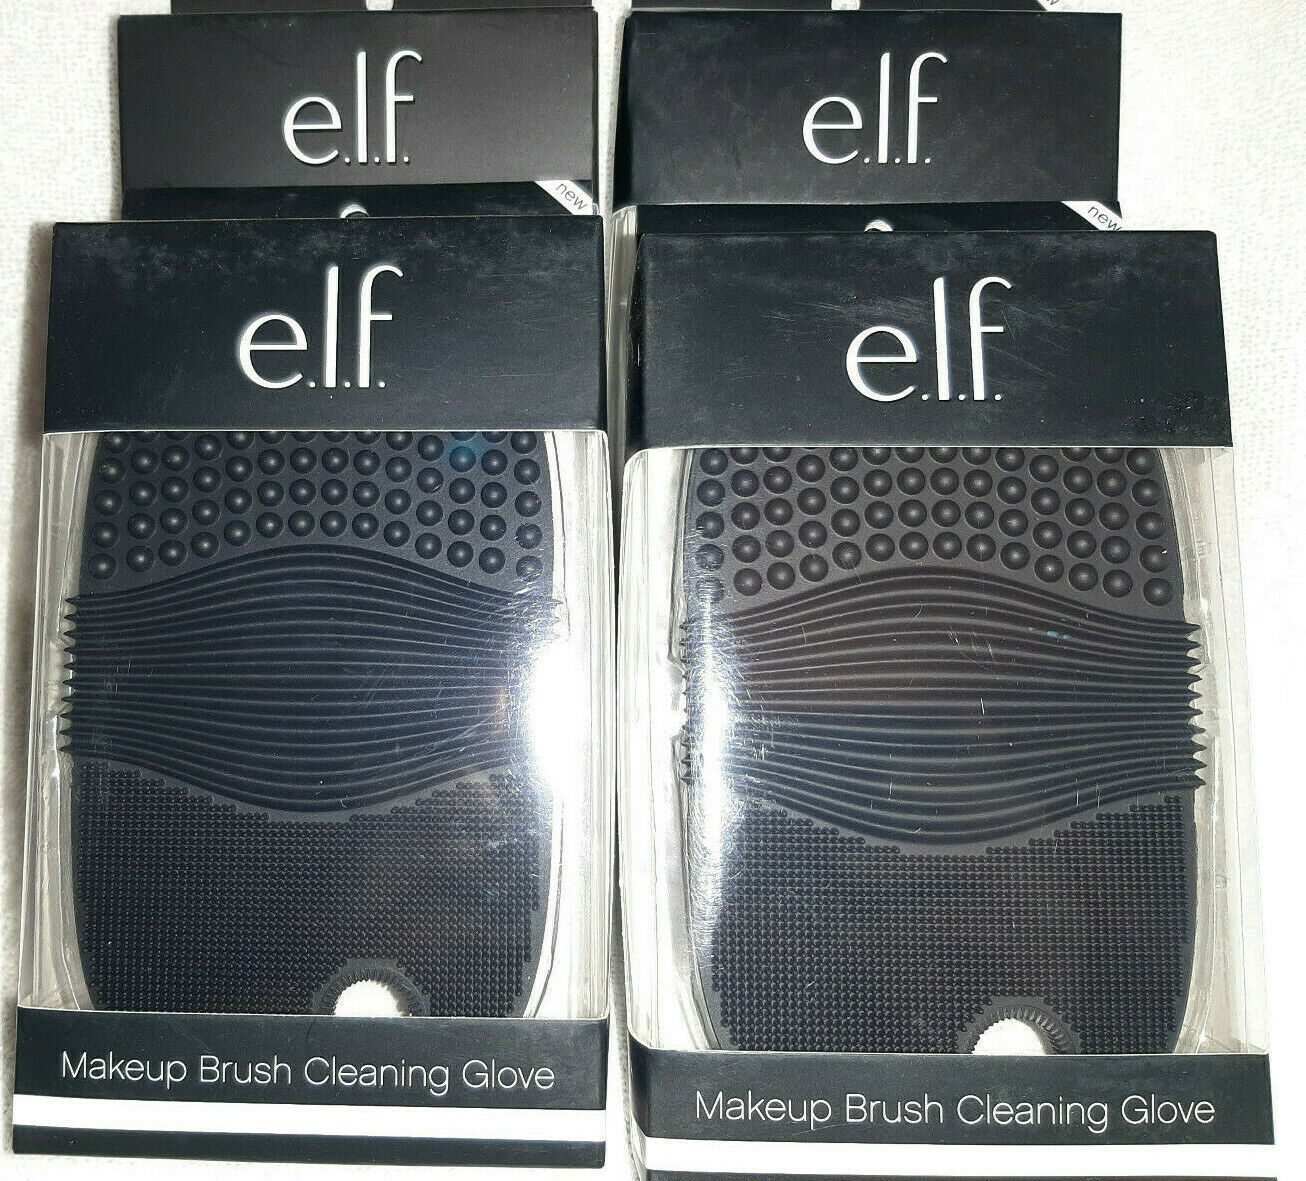 4 Pack of ELF MAKEUP BRUSH CLEANING GLOVE #85075  Brand New In Boxes - $18.76